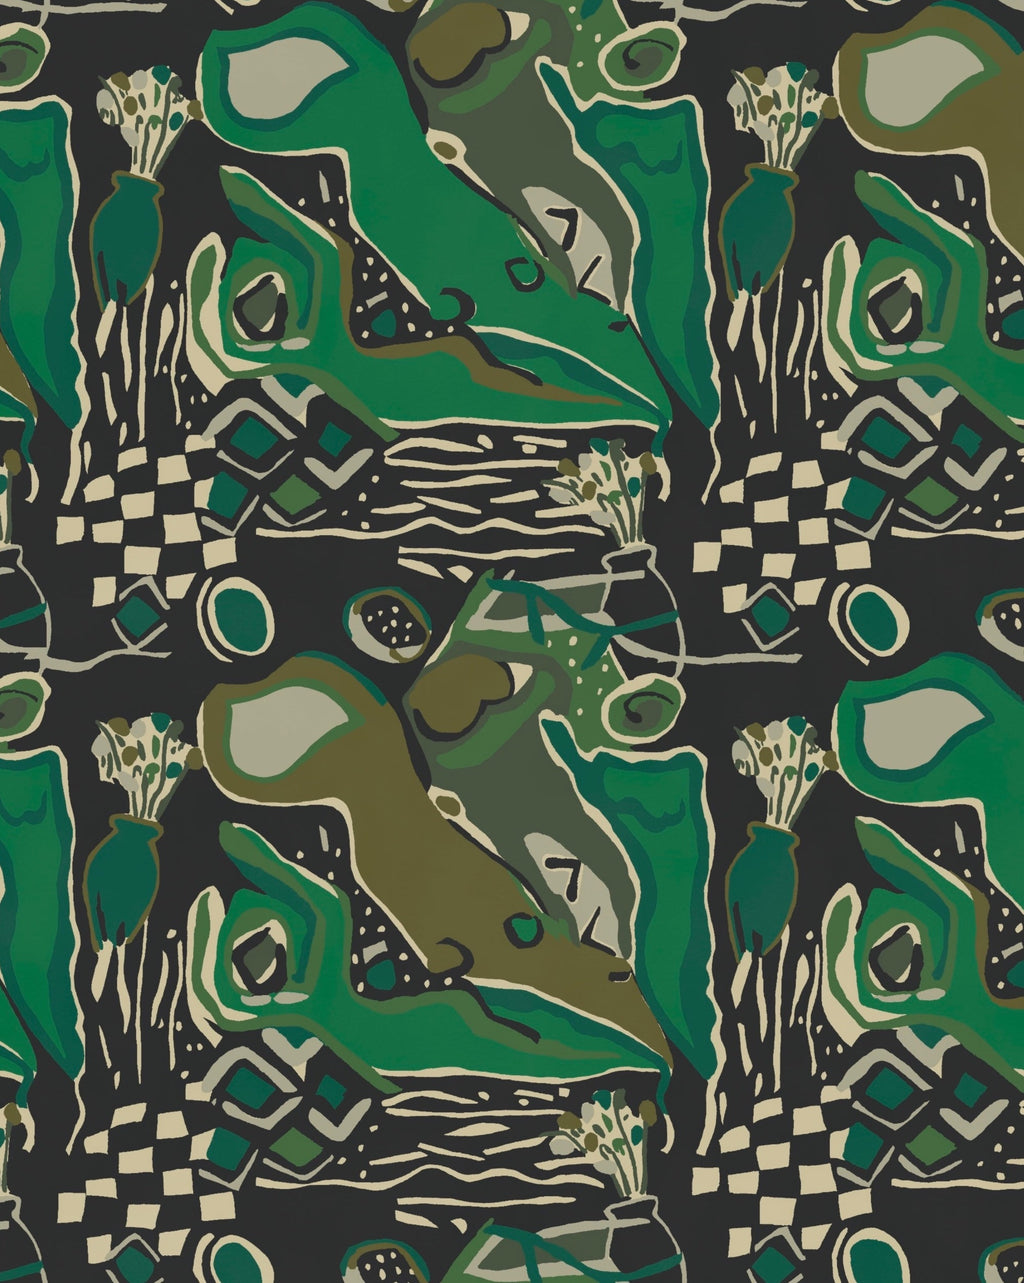 Figurines Wallpaper - Olive + Kelly green